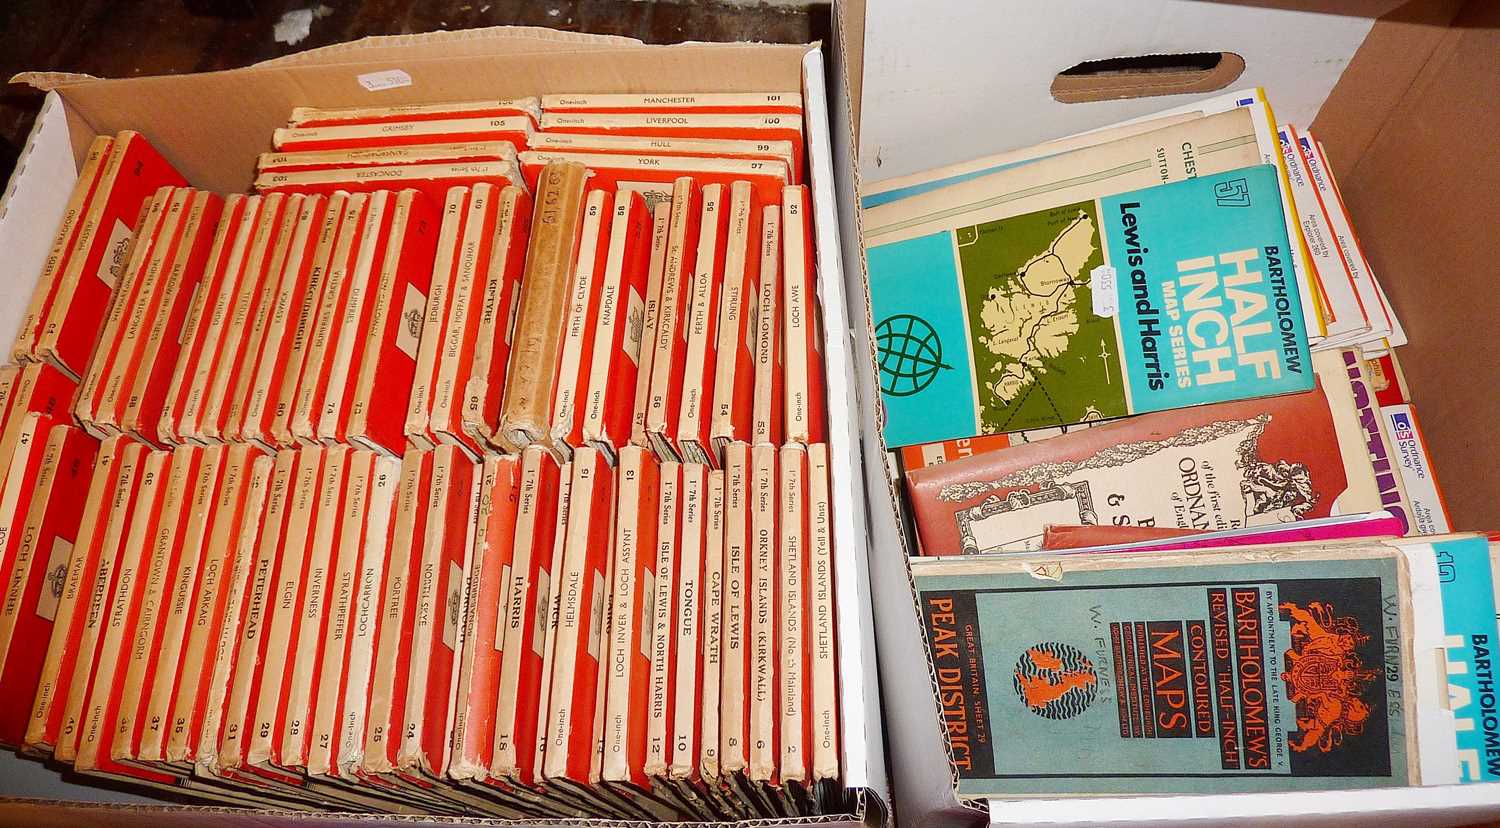 Large quantity (two boxes) of old Ordnance Survey and other maps